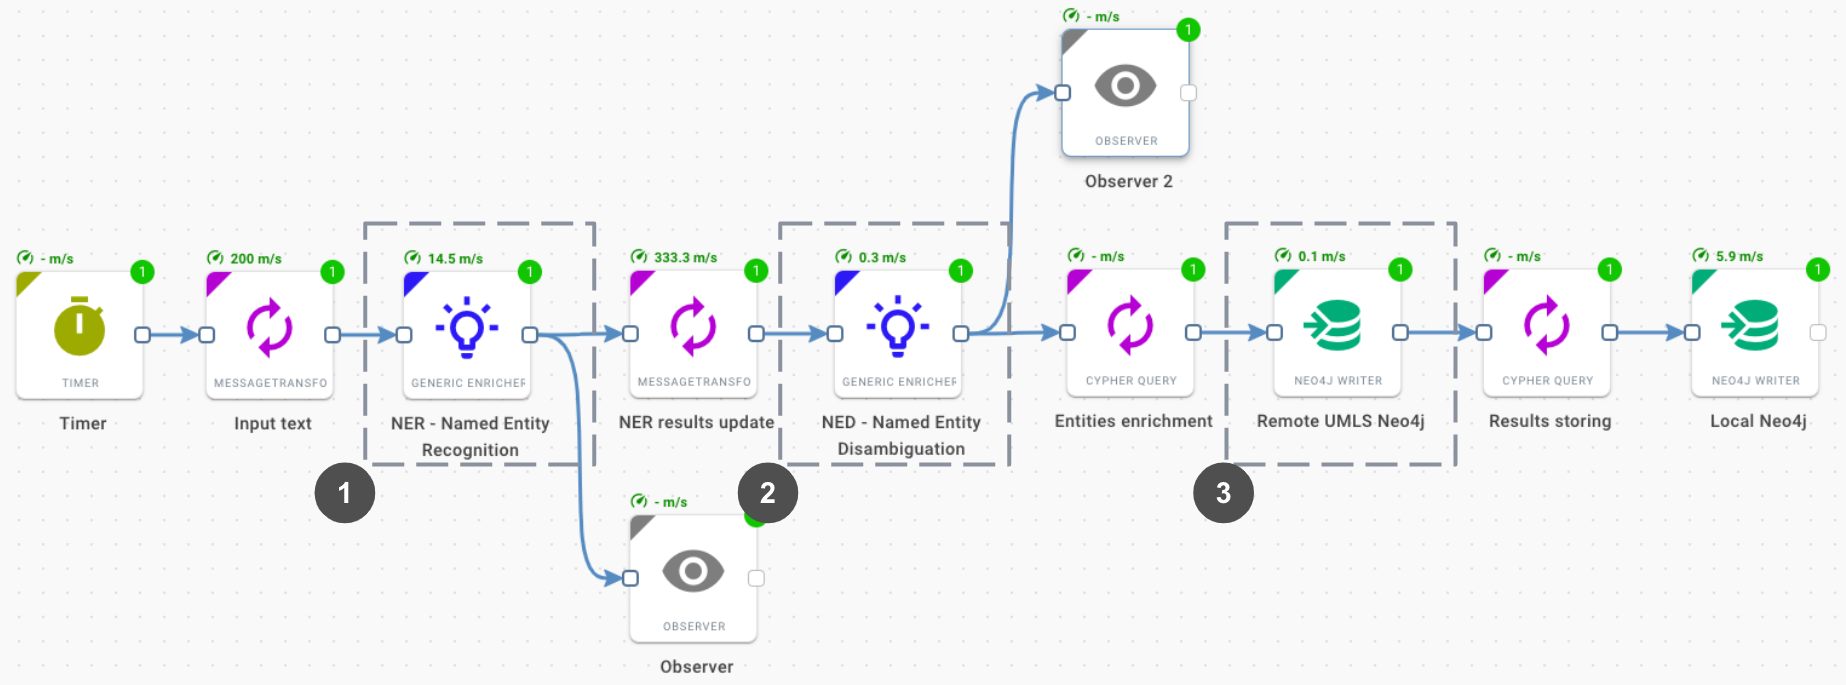 Figure 3 - Hume Orchestra workflow for NED